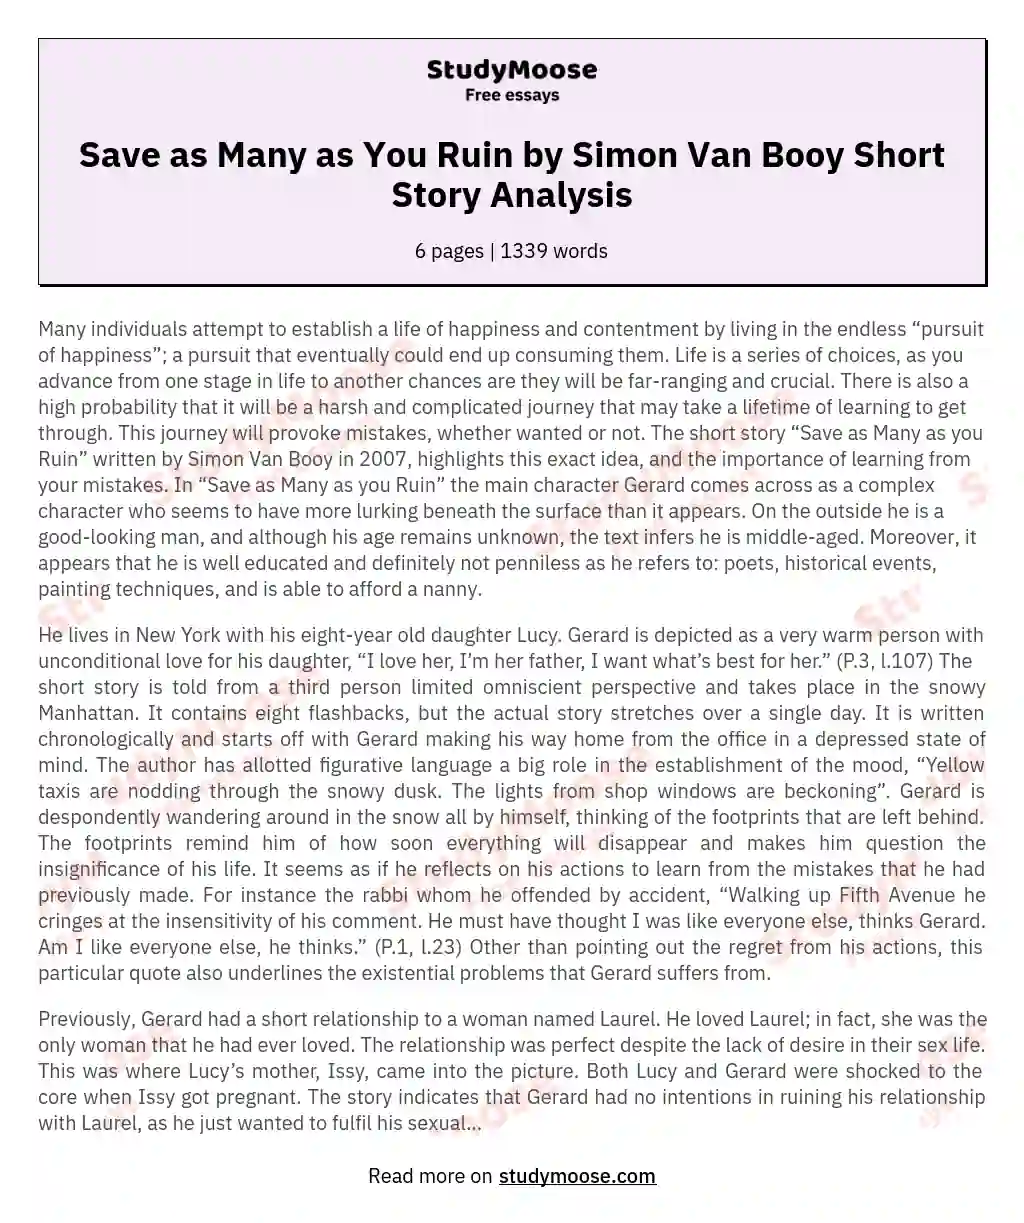 Save as Many as You Ruin by Simon Van Booy Short Story Analysis